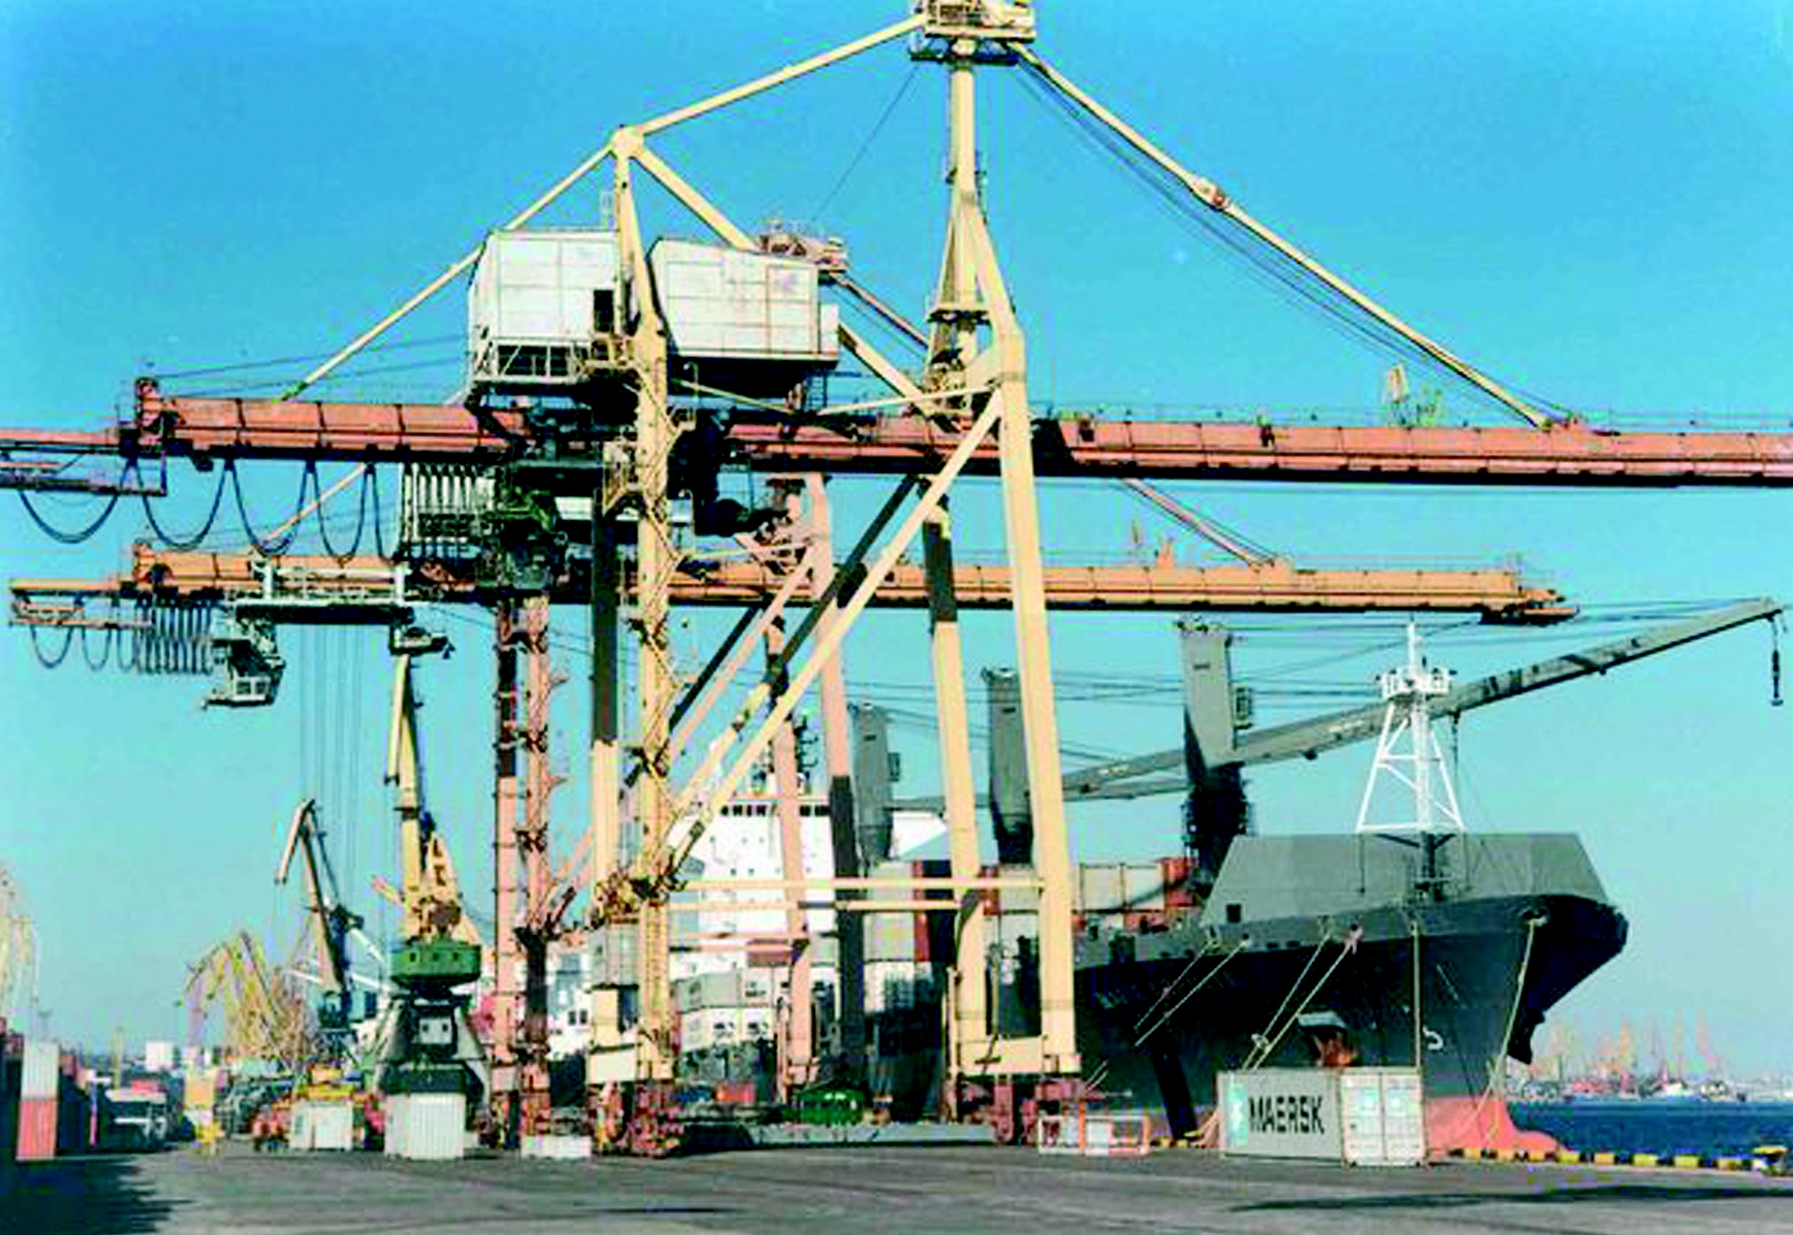 Port of Ilychevsk container terminal